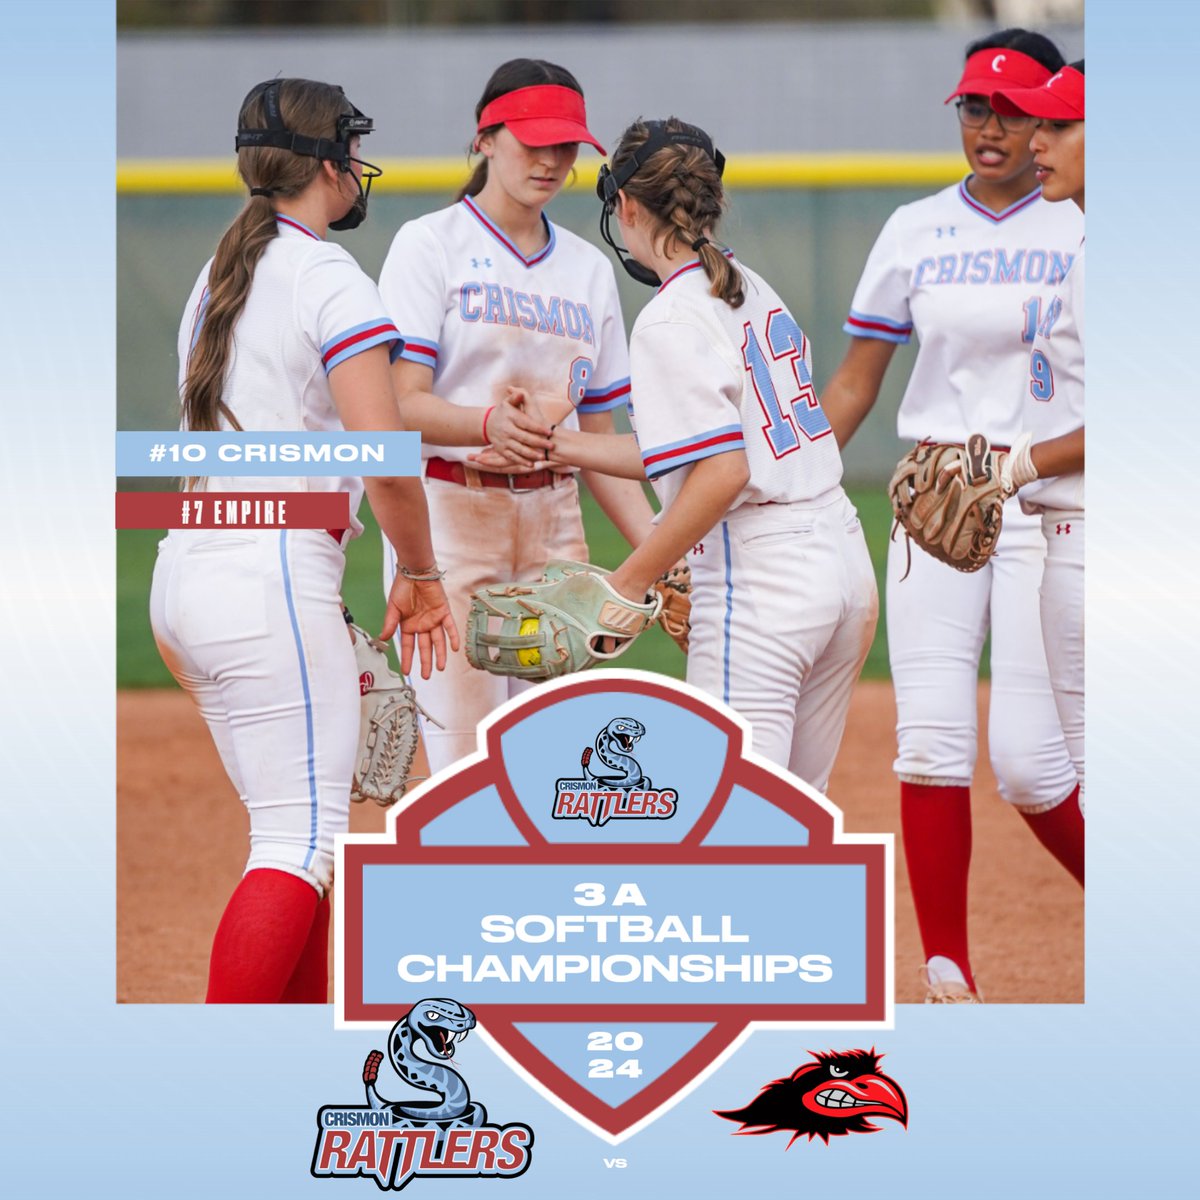 🥎2024 AIA Softball 3A State Championship Round 1 🥎
The #10 Crismon Rattlers will face #7 Empire at Empire High School on Saturday, April 27th at 11AM
#CrismonHS #QCUSDAthletics #QCleads